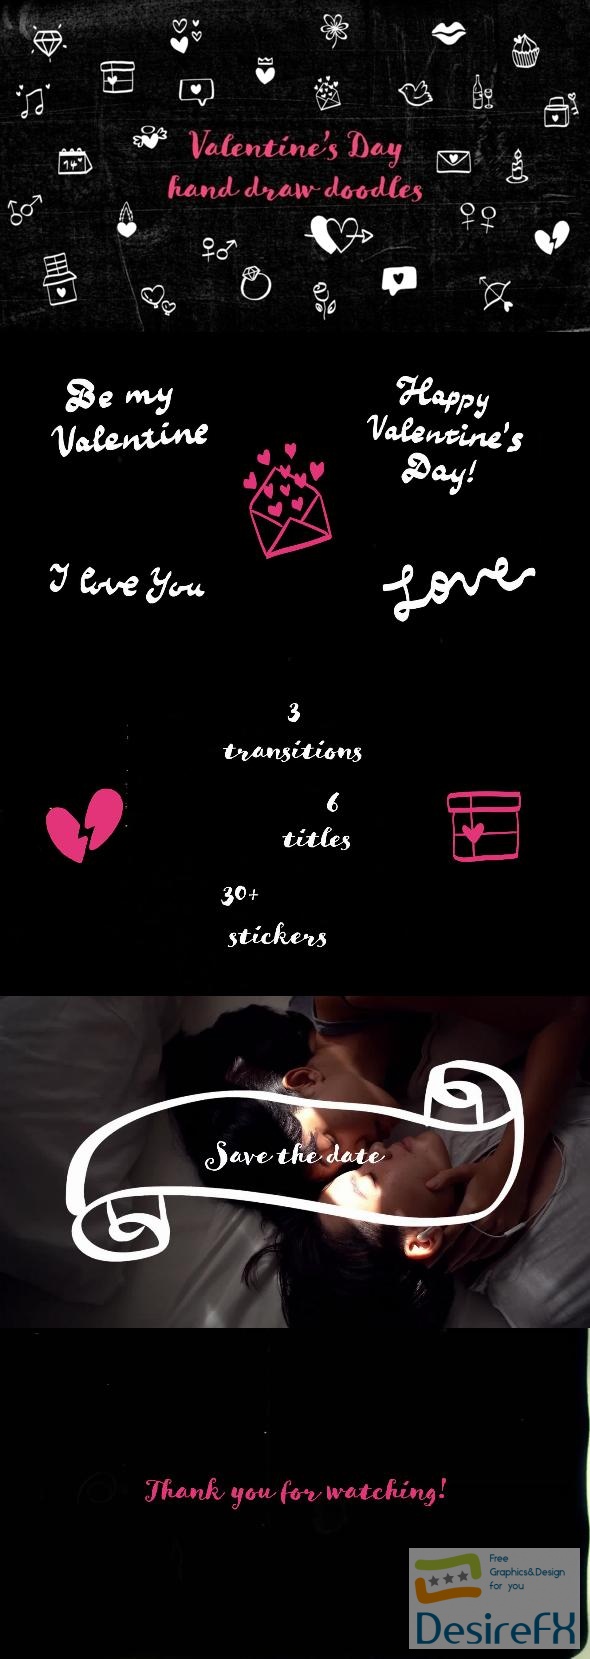 VideoHive Valentine's Day Doodles 42949768